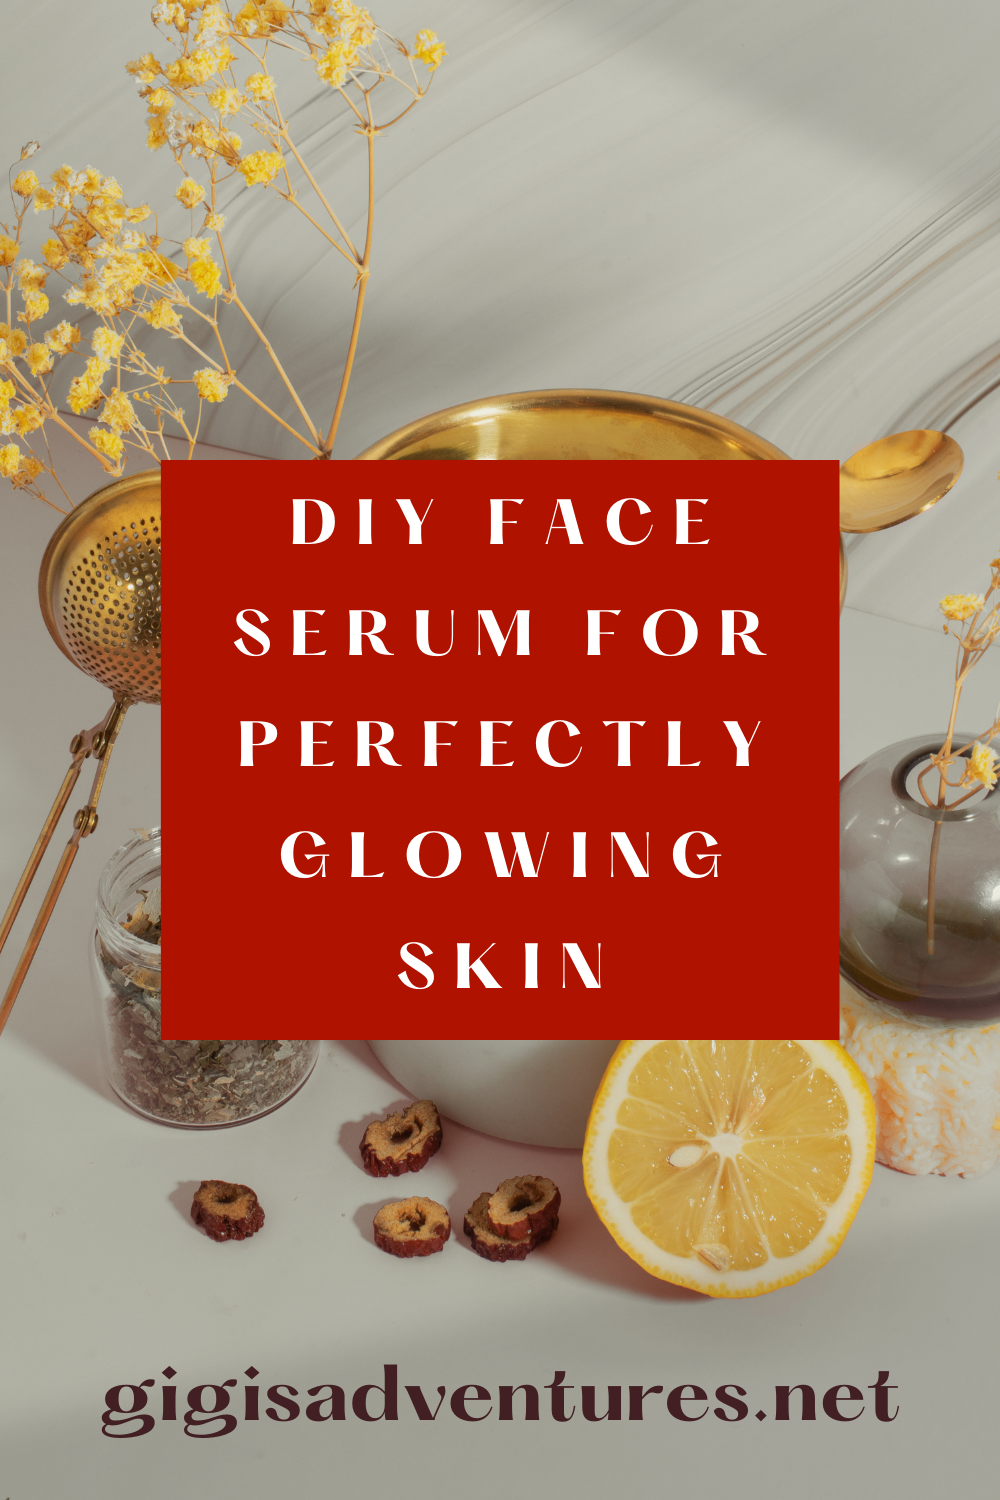 DIY Face Serum for Perfectly Glowing Skin